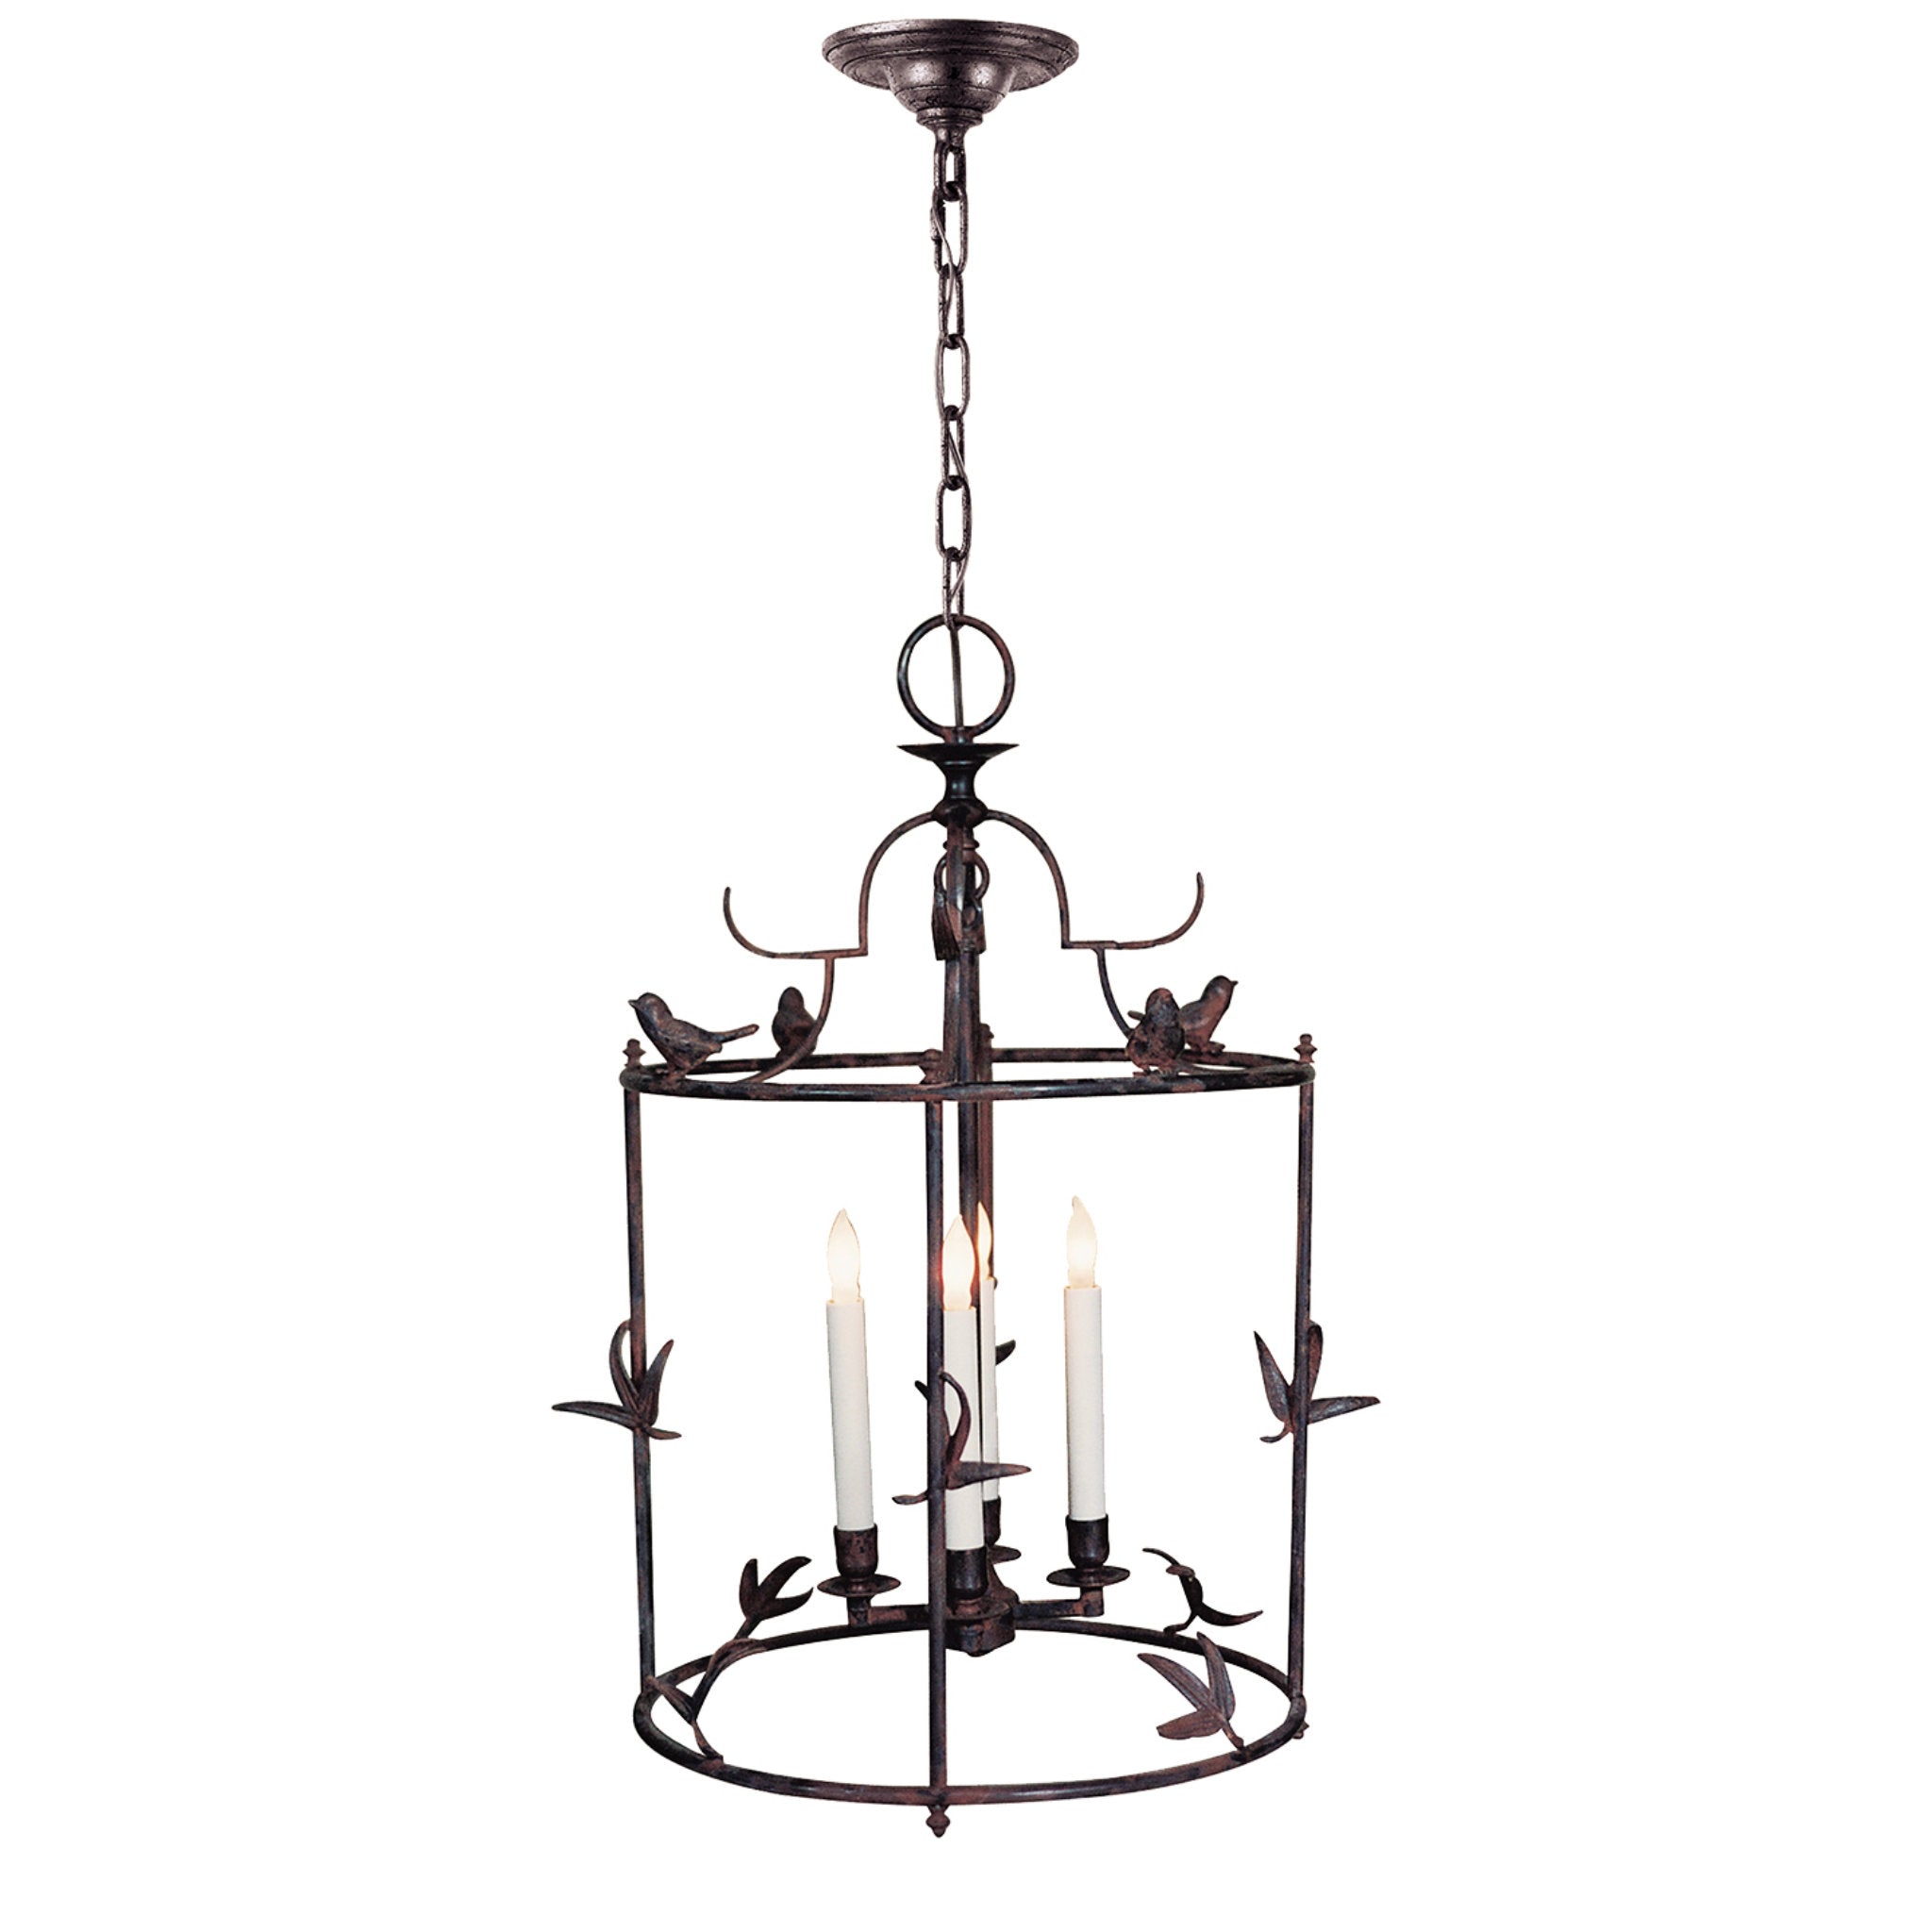 Chapman & Myers Diego Grande Classical Perching Bird Lantern in Rust with Verdis Accent